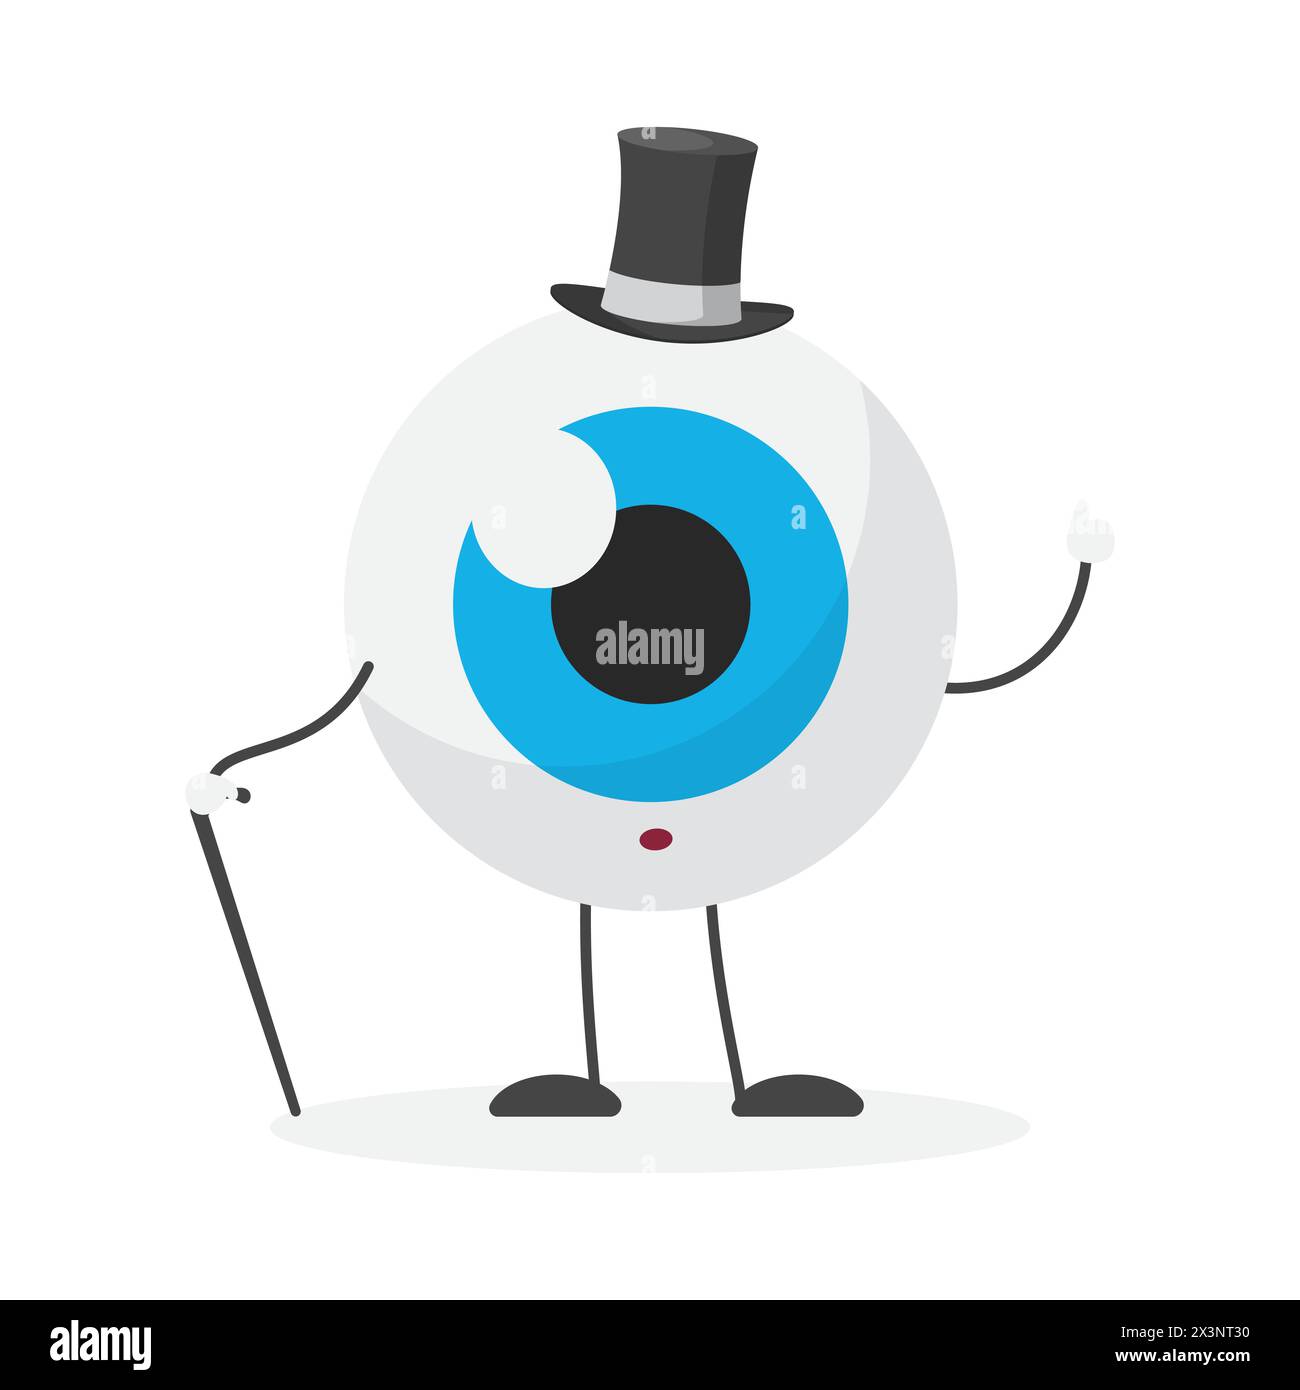 Elegant funny eyeball character standing with gentlemans bowler hat and cane vector illustration Stock Vector